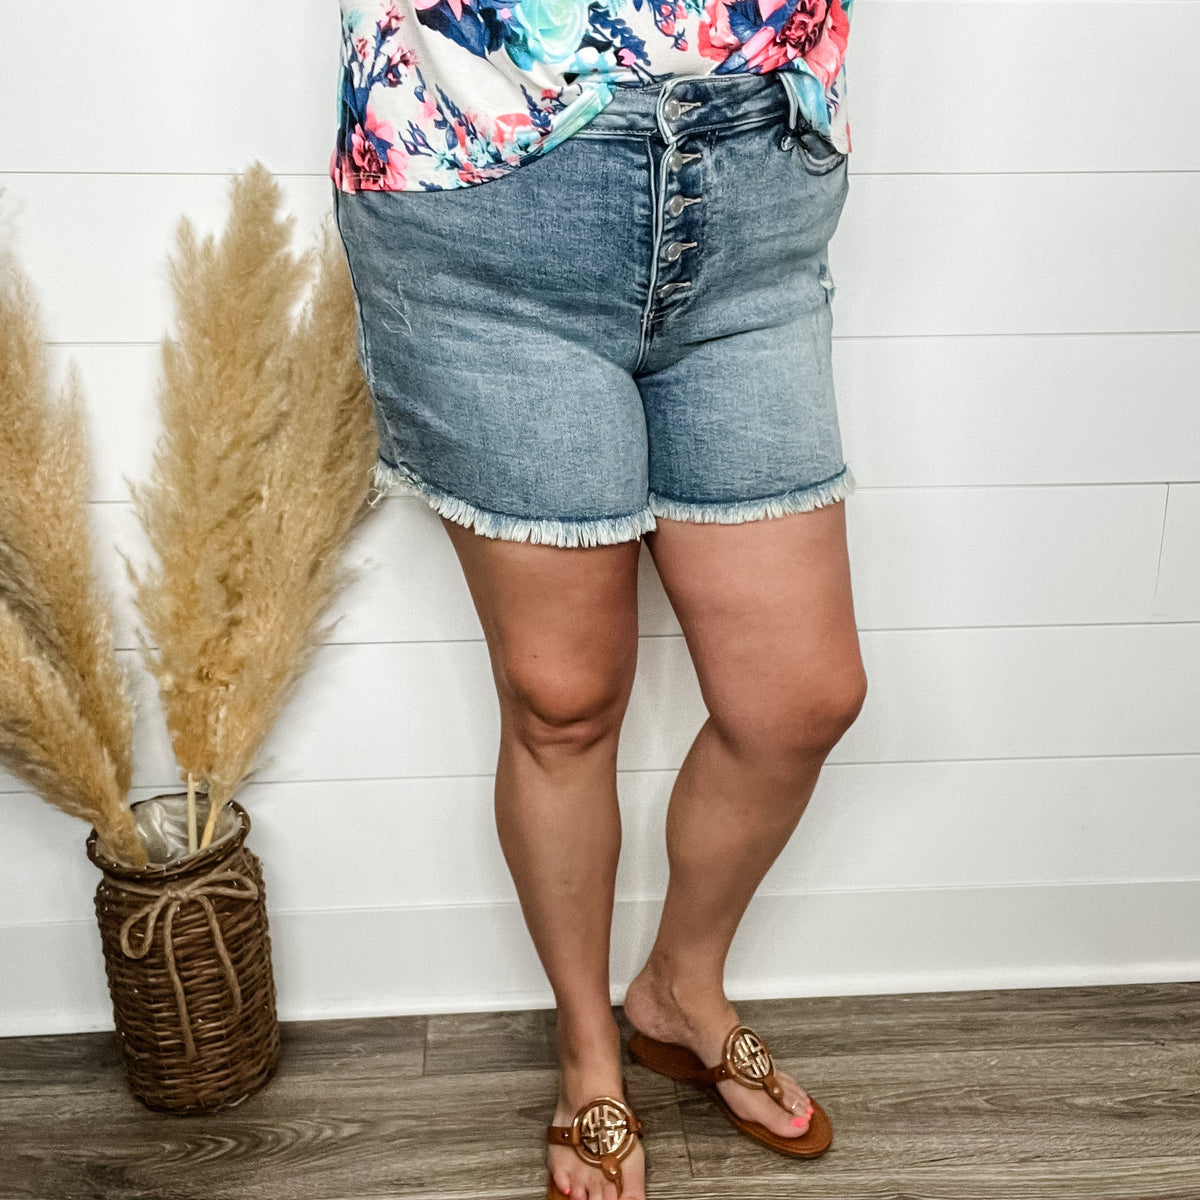 Judy Blue "Downtown Girl" Buttonfly shorts-Lola Monroe Boutique